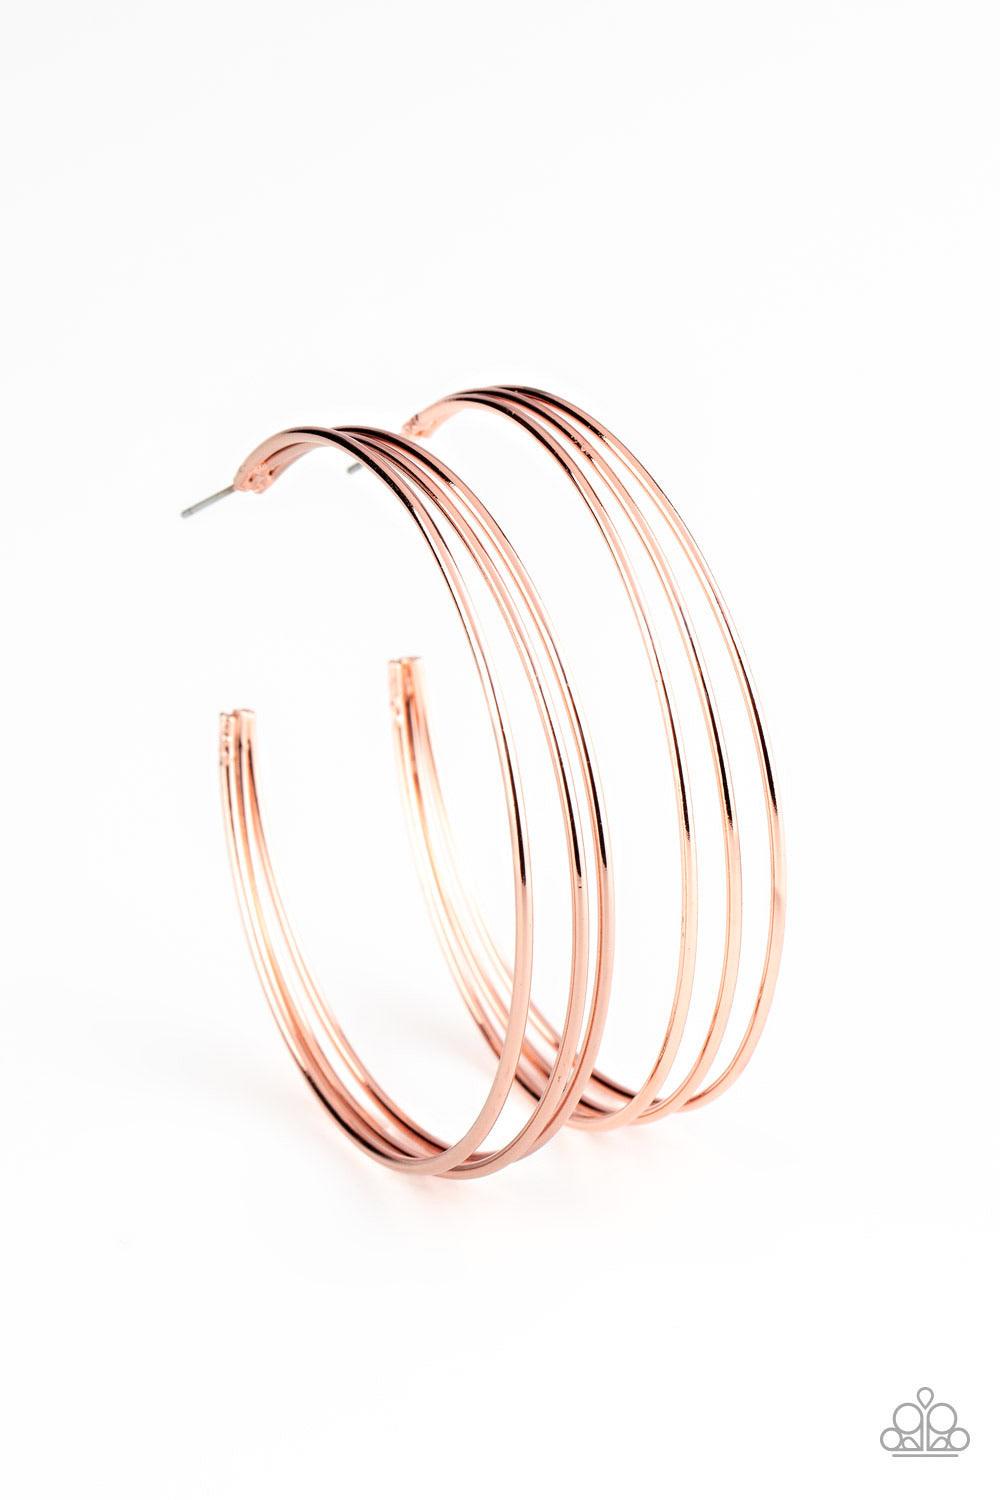 Rimmed Radiand ~Copper - Beautifully Blinged